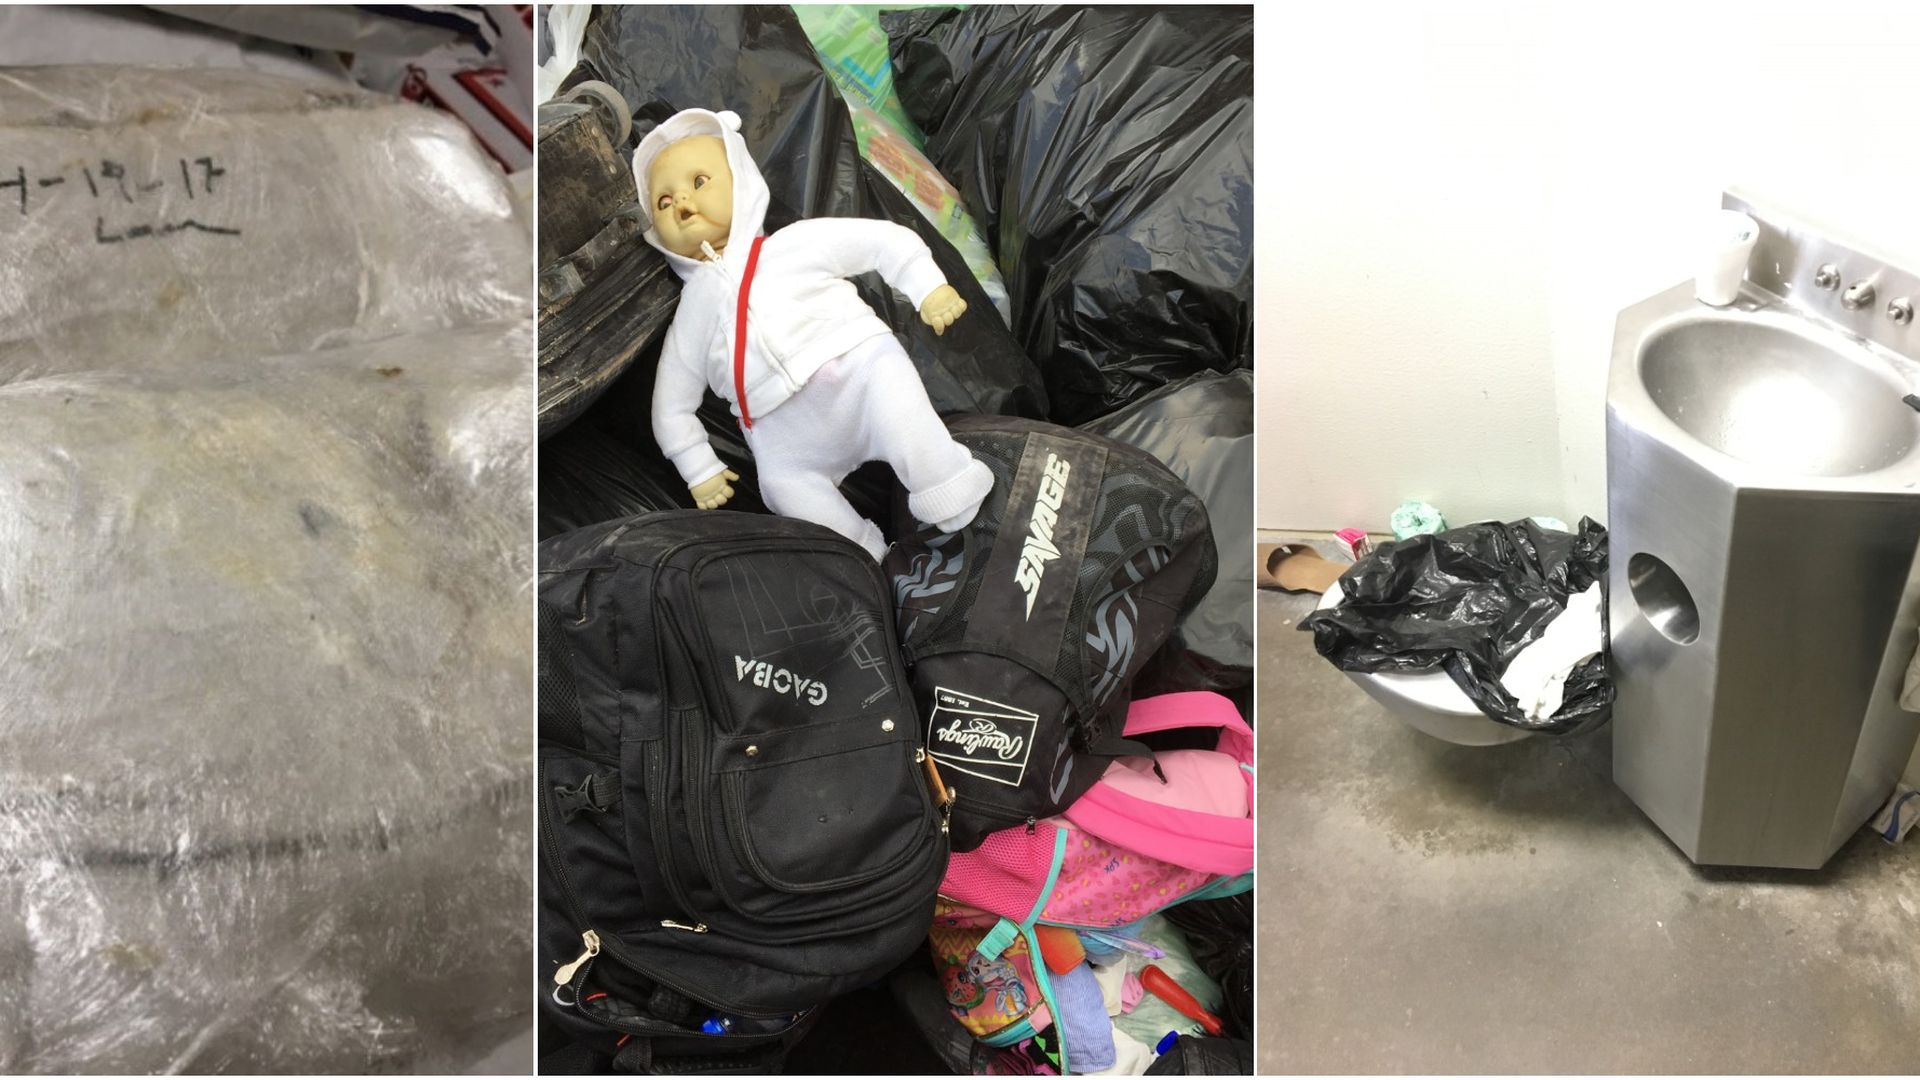 A three part image showing expired bags of food, a pile of discarded luggage and a dirty bathroom.